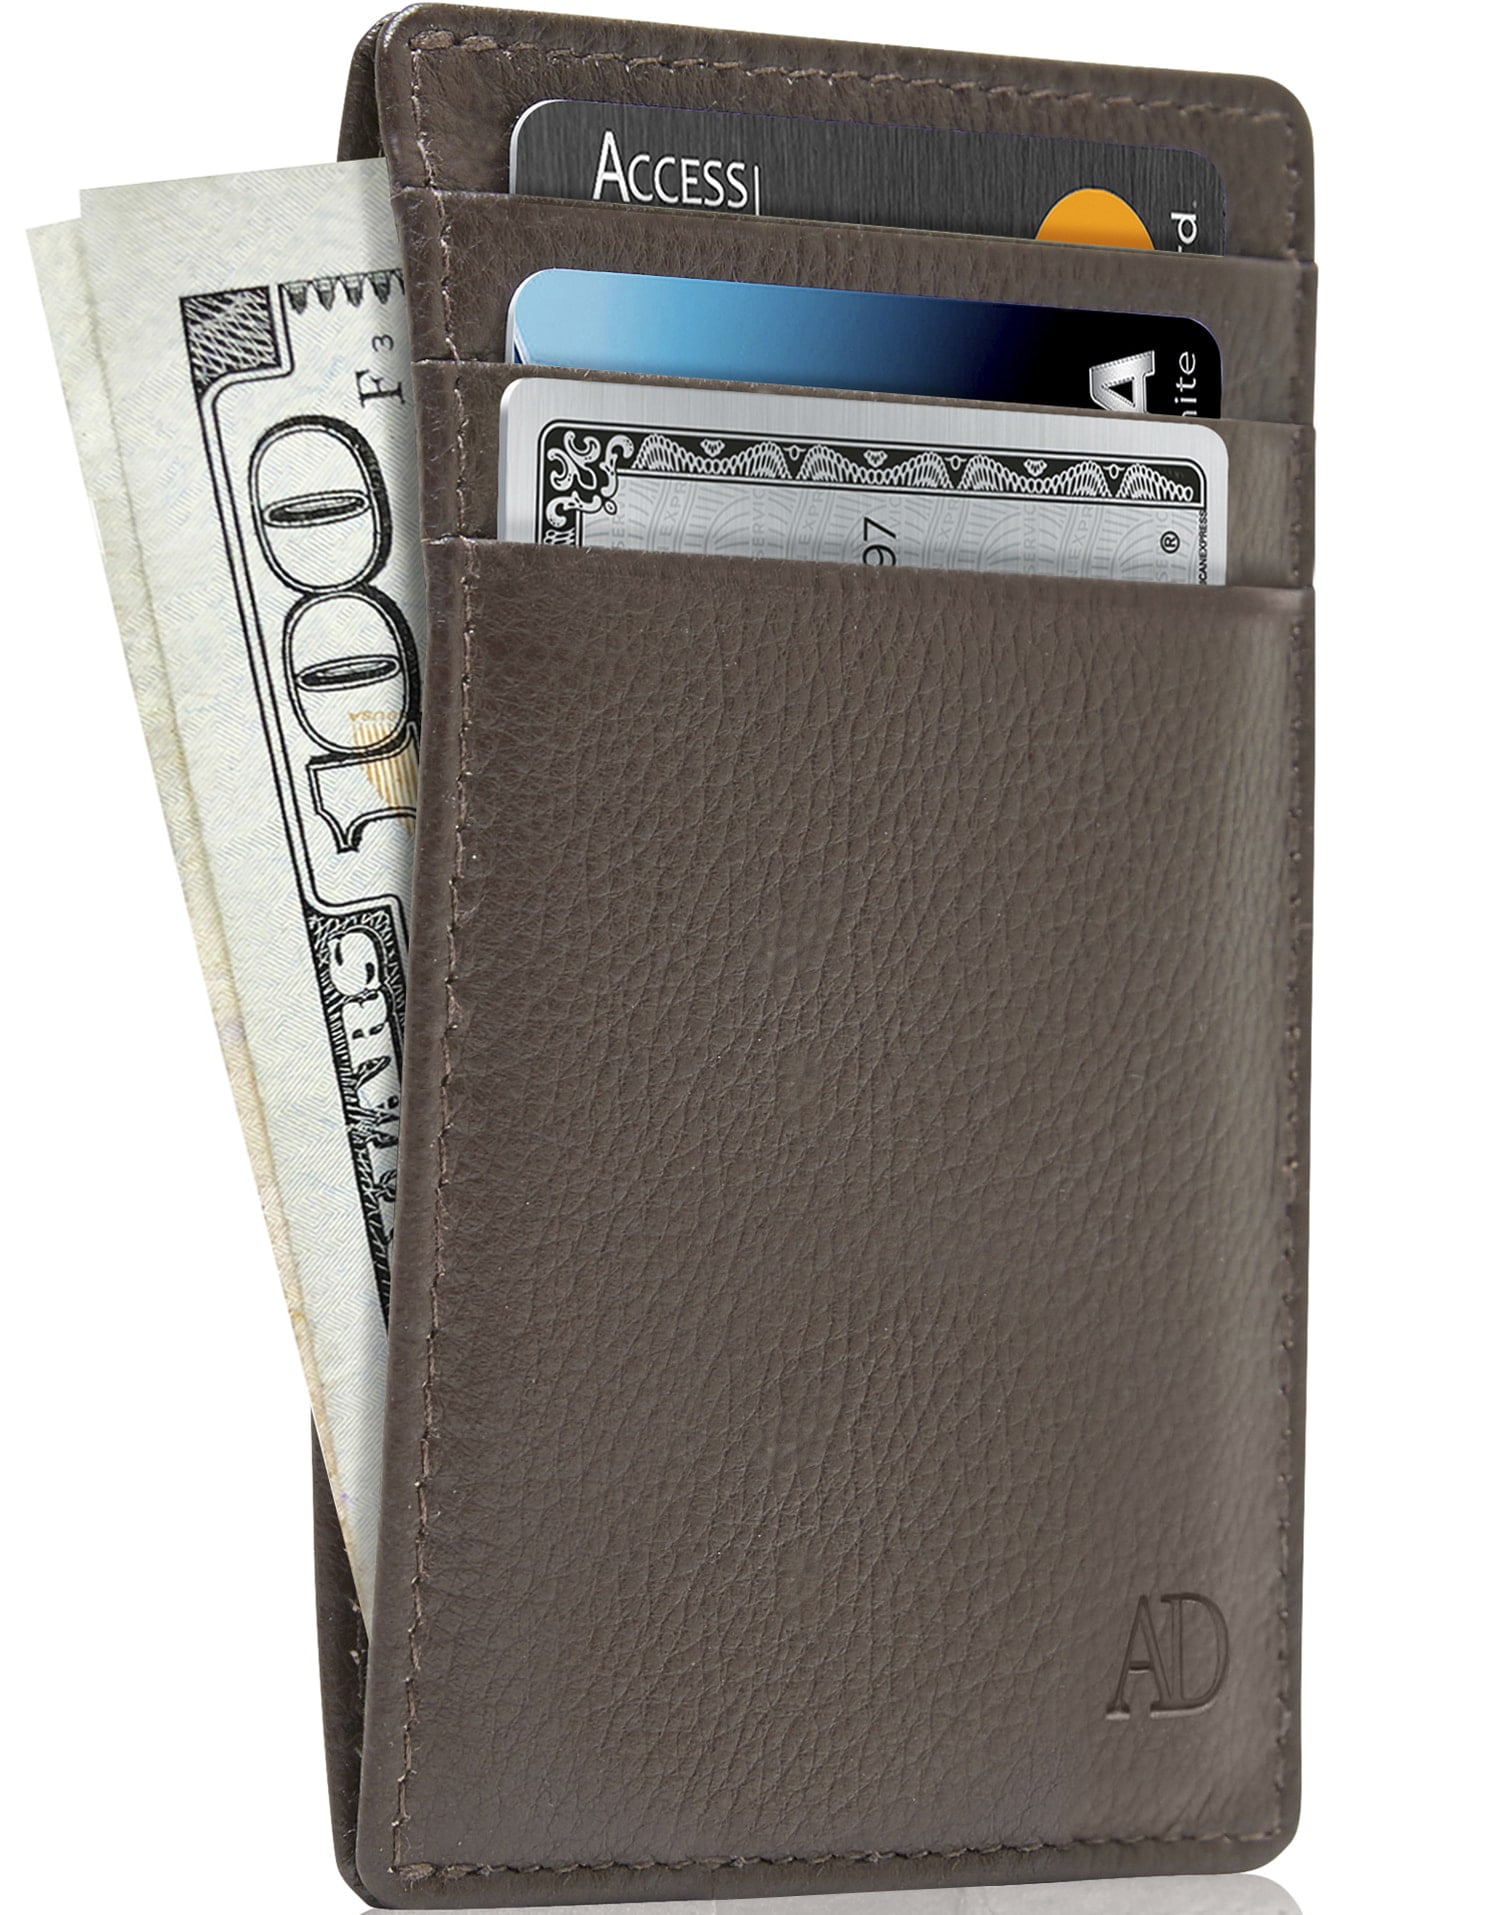 Rfid Blocking Secure Mini Wallet & RFID Sleeve Genuine Leather Front Pocket Wallet Best Protection for your Credit Cards coffee